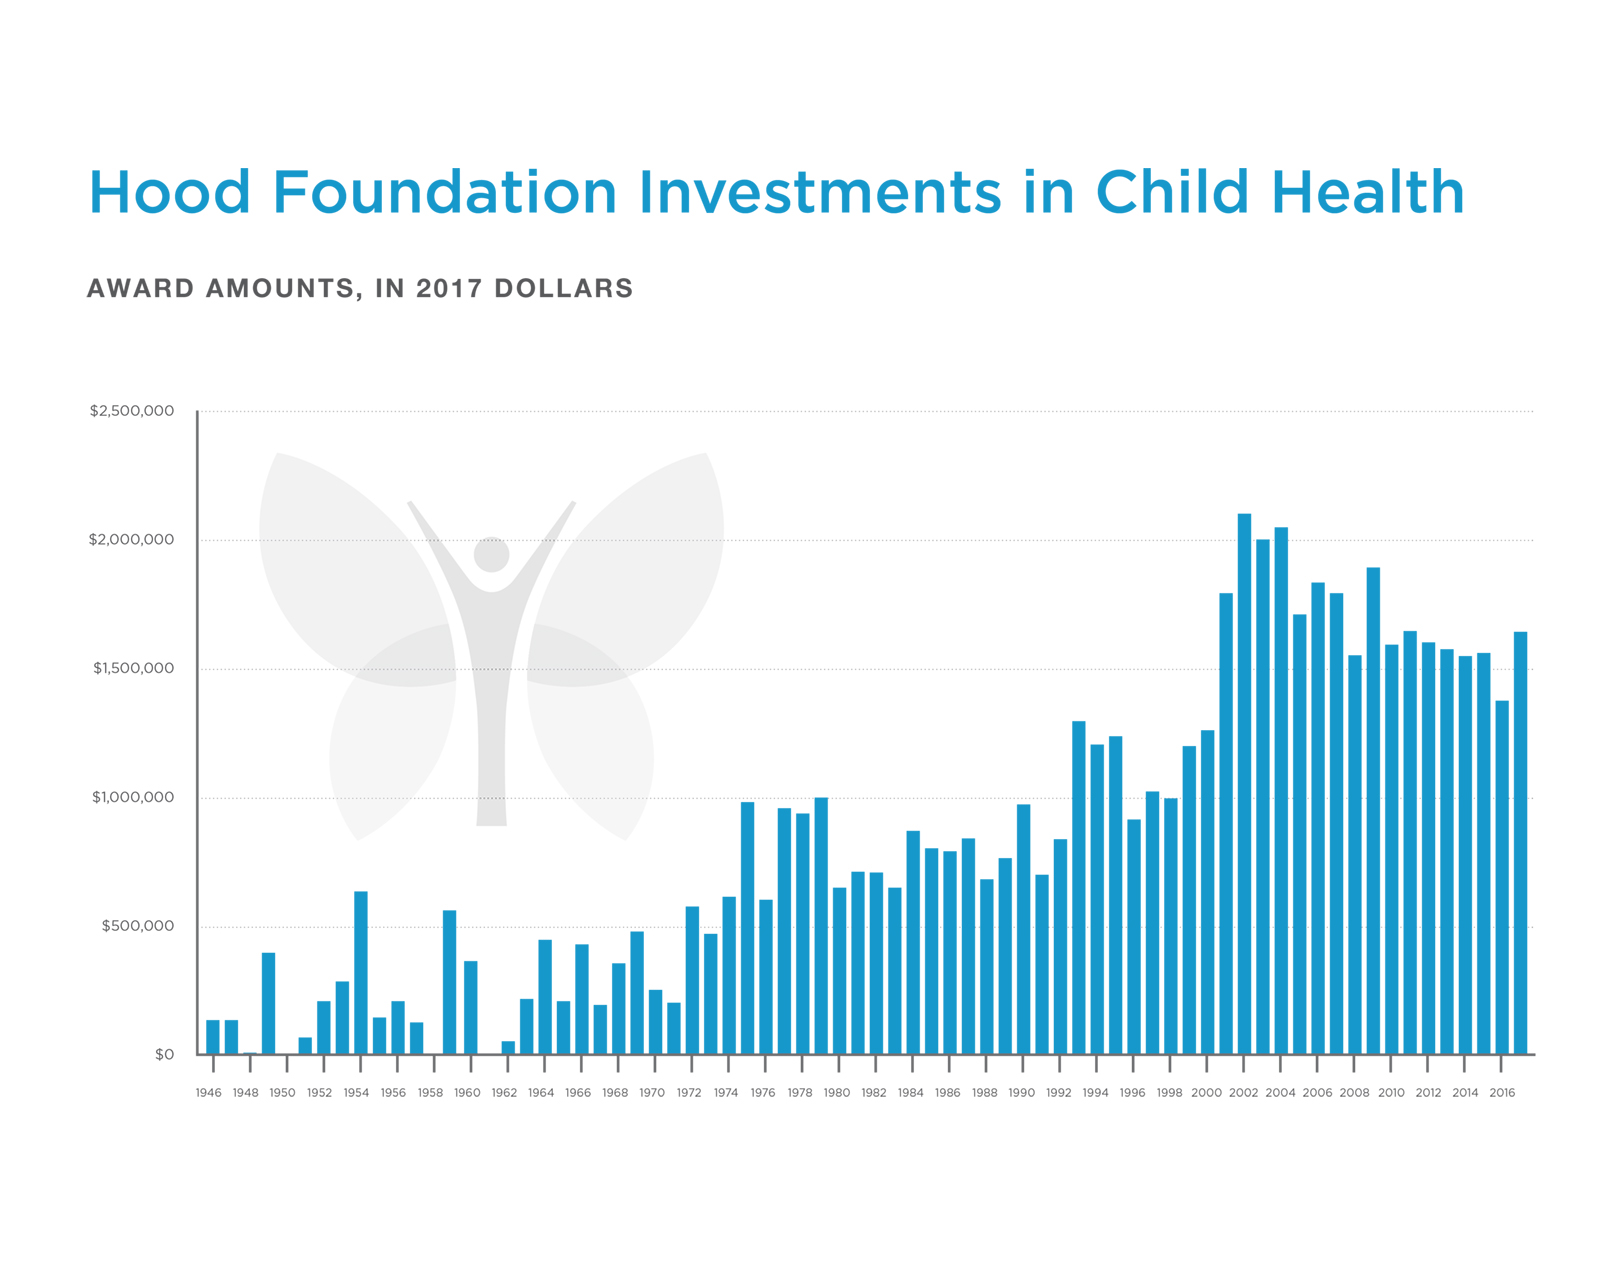 The Hood Foundation's Child Health Investment Graph from 1946 to 2017